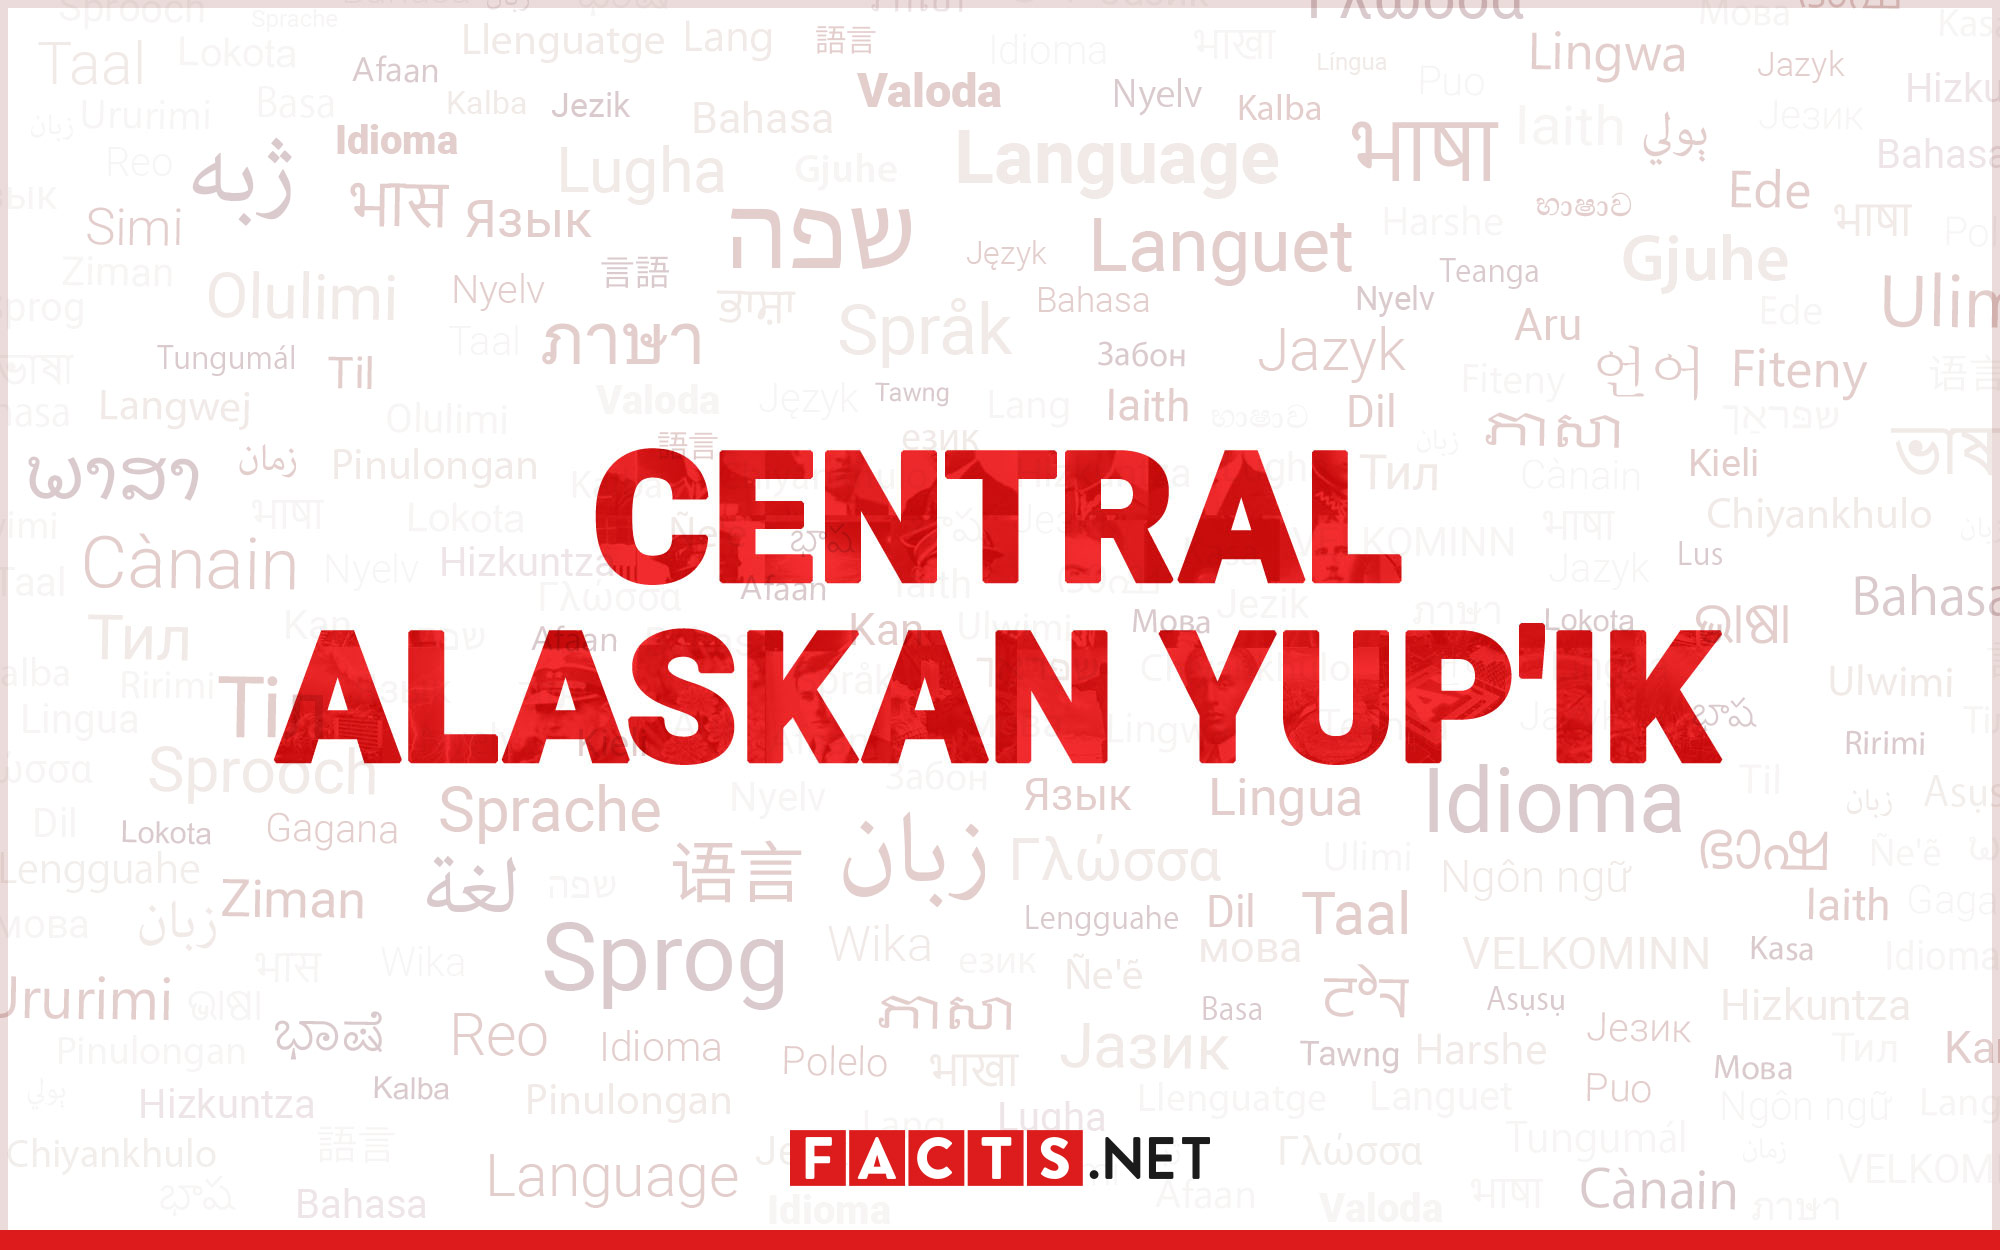 11-fascinating-facts-about-central-alaskan-yupik